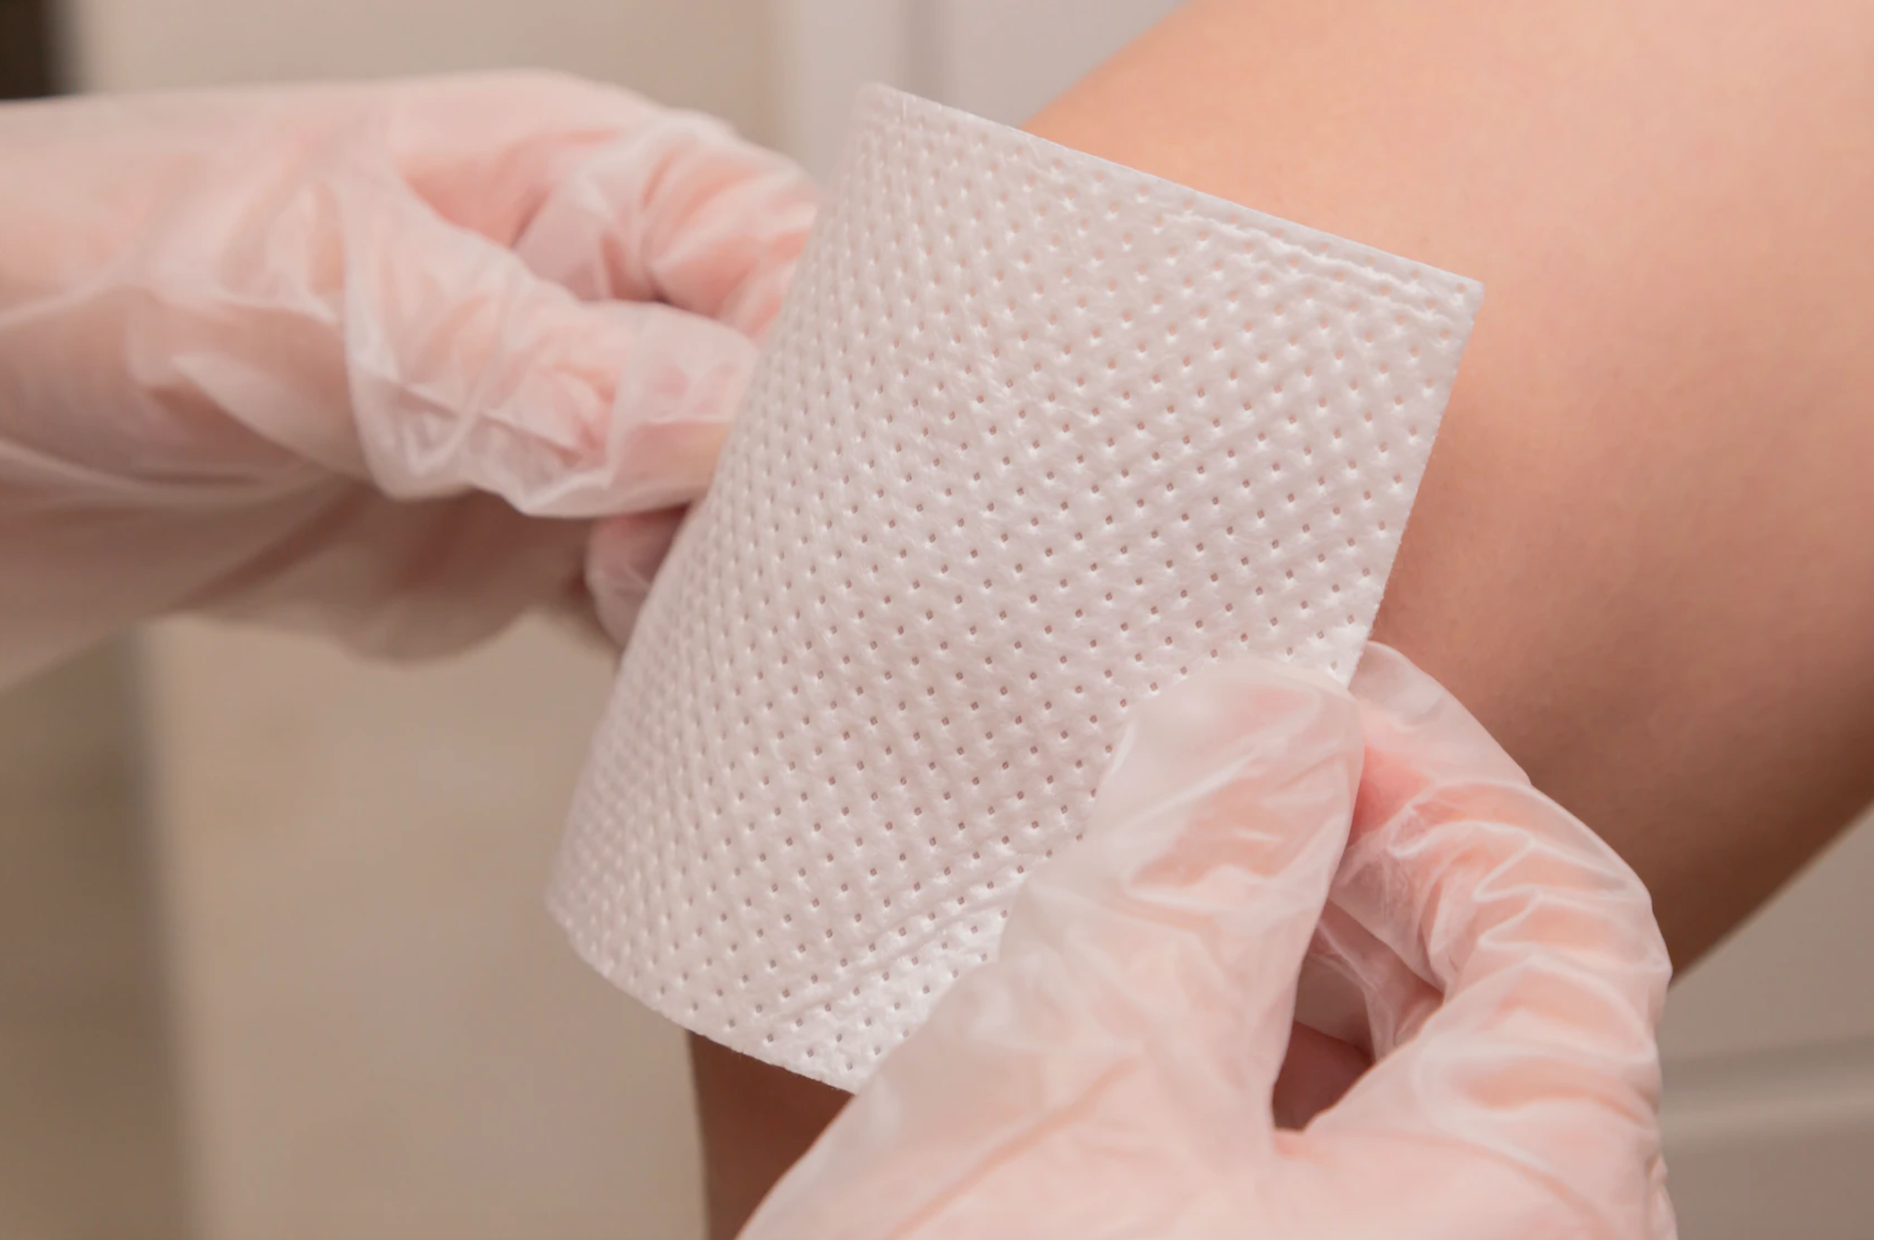 8 Helpful Tips For Removing Bandage Adhesive From Skin